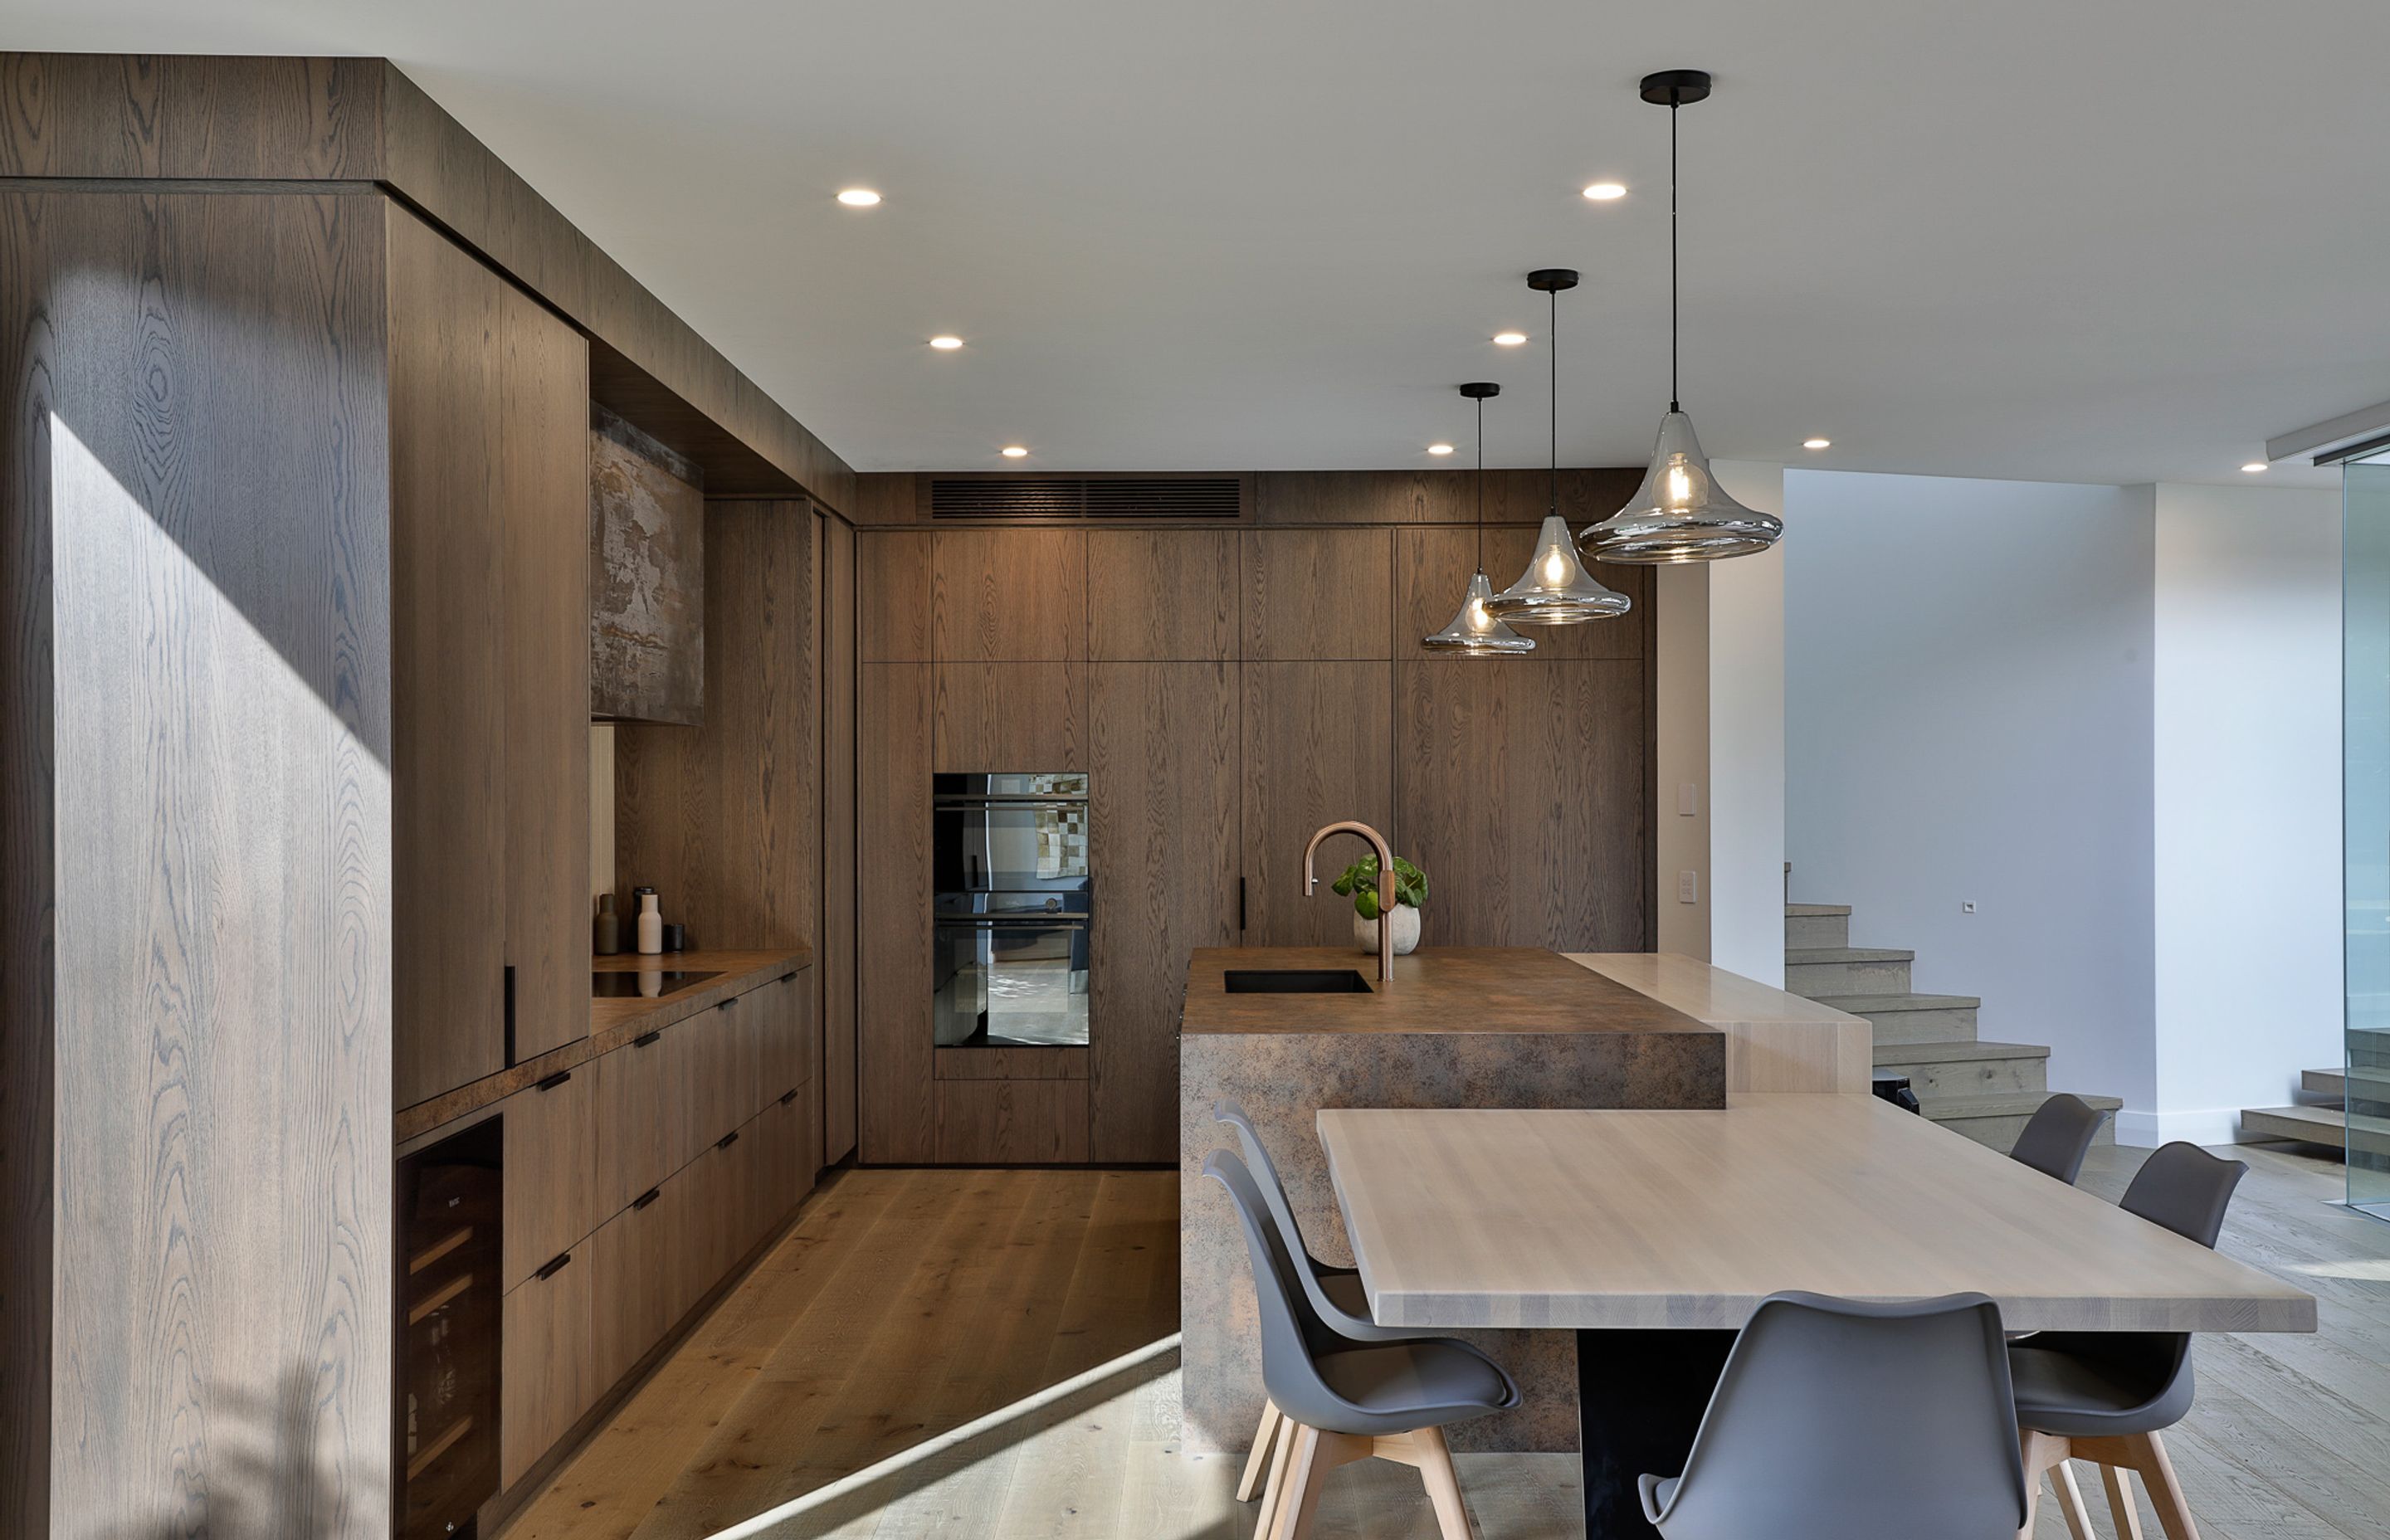 Prime Toitū Veneer, Toitū American White Oak. Design by Gunnar Friese, Hewe Kitchens and Interiors. Photography by Jamie Cobel.